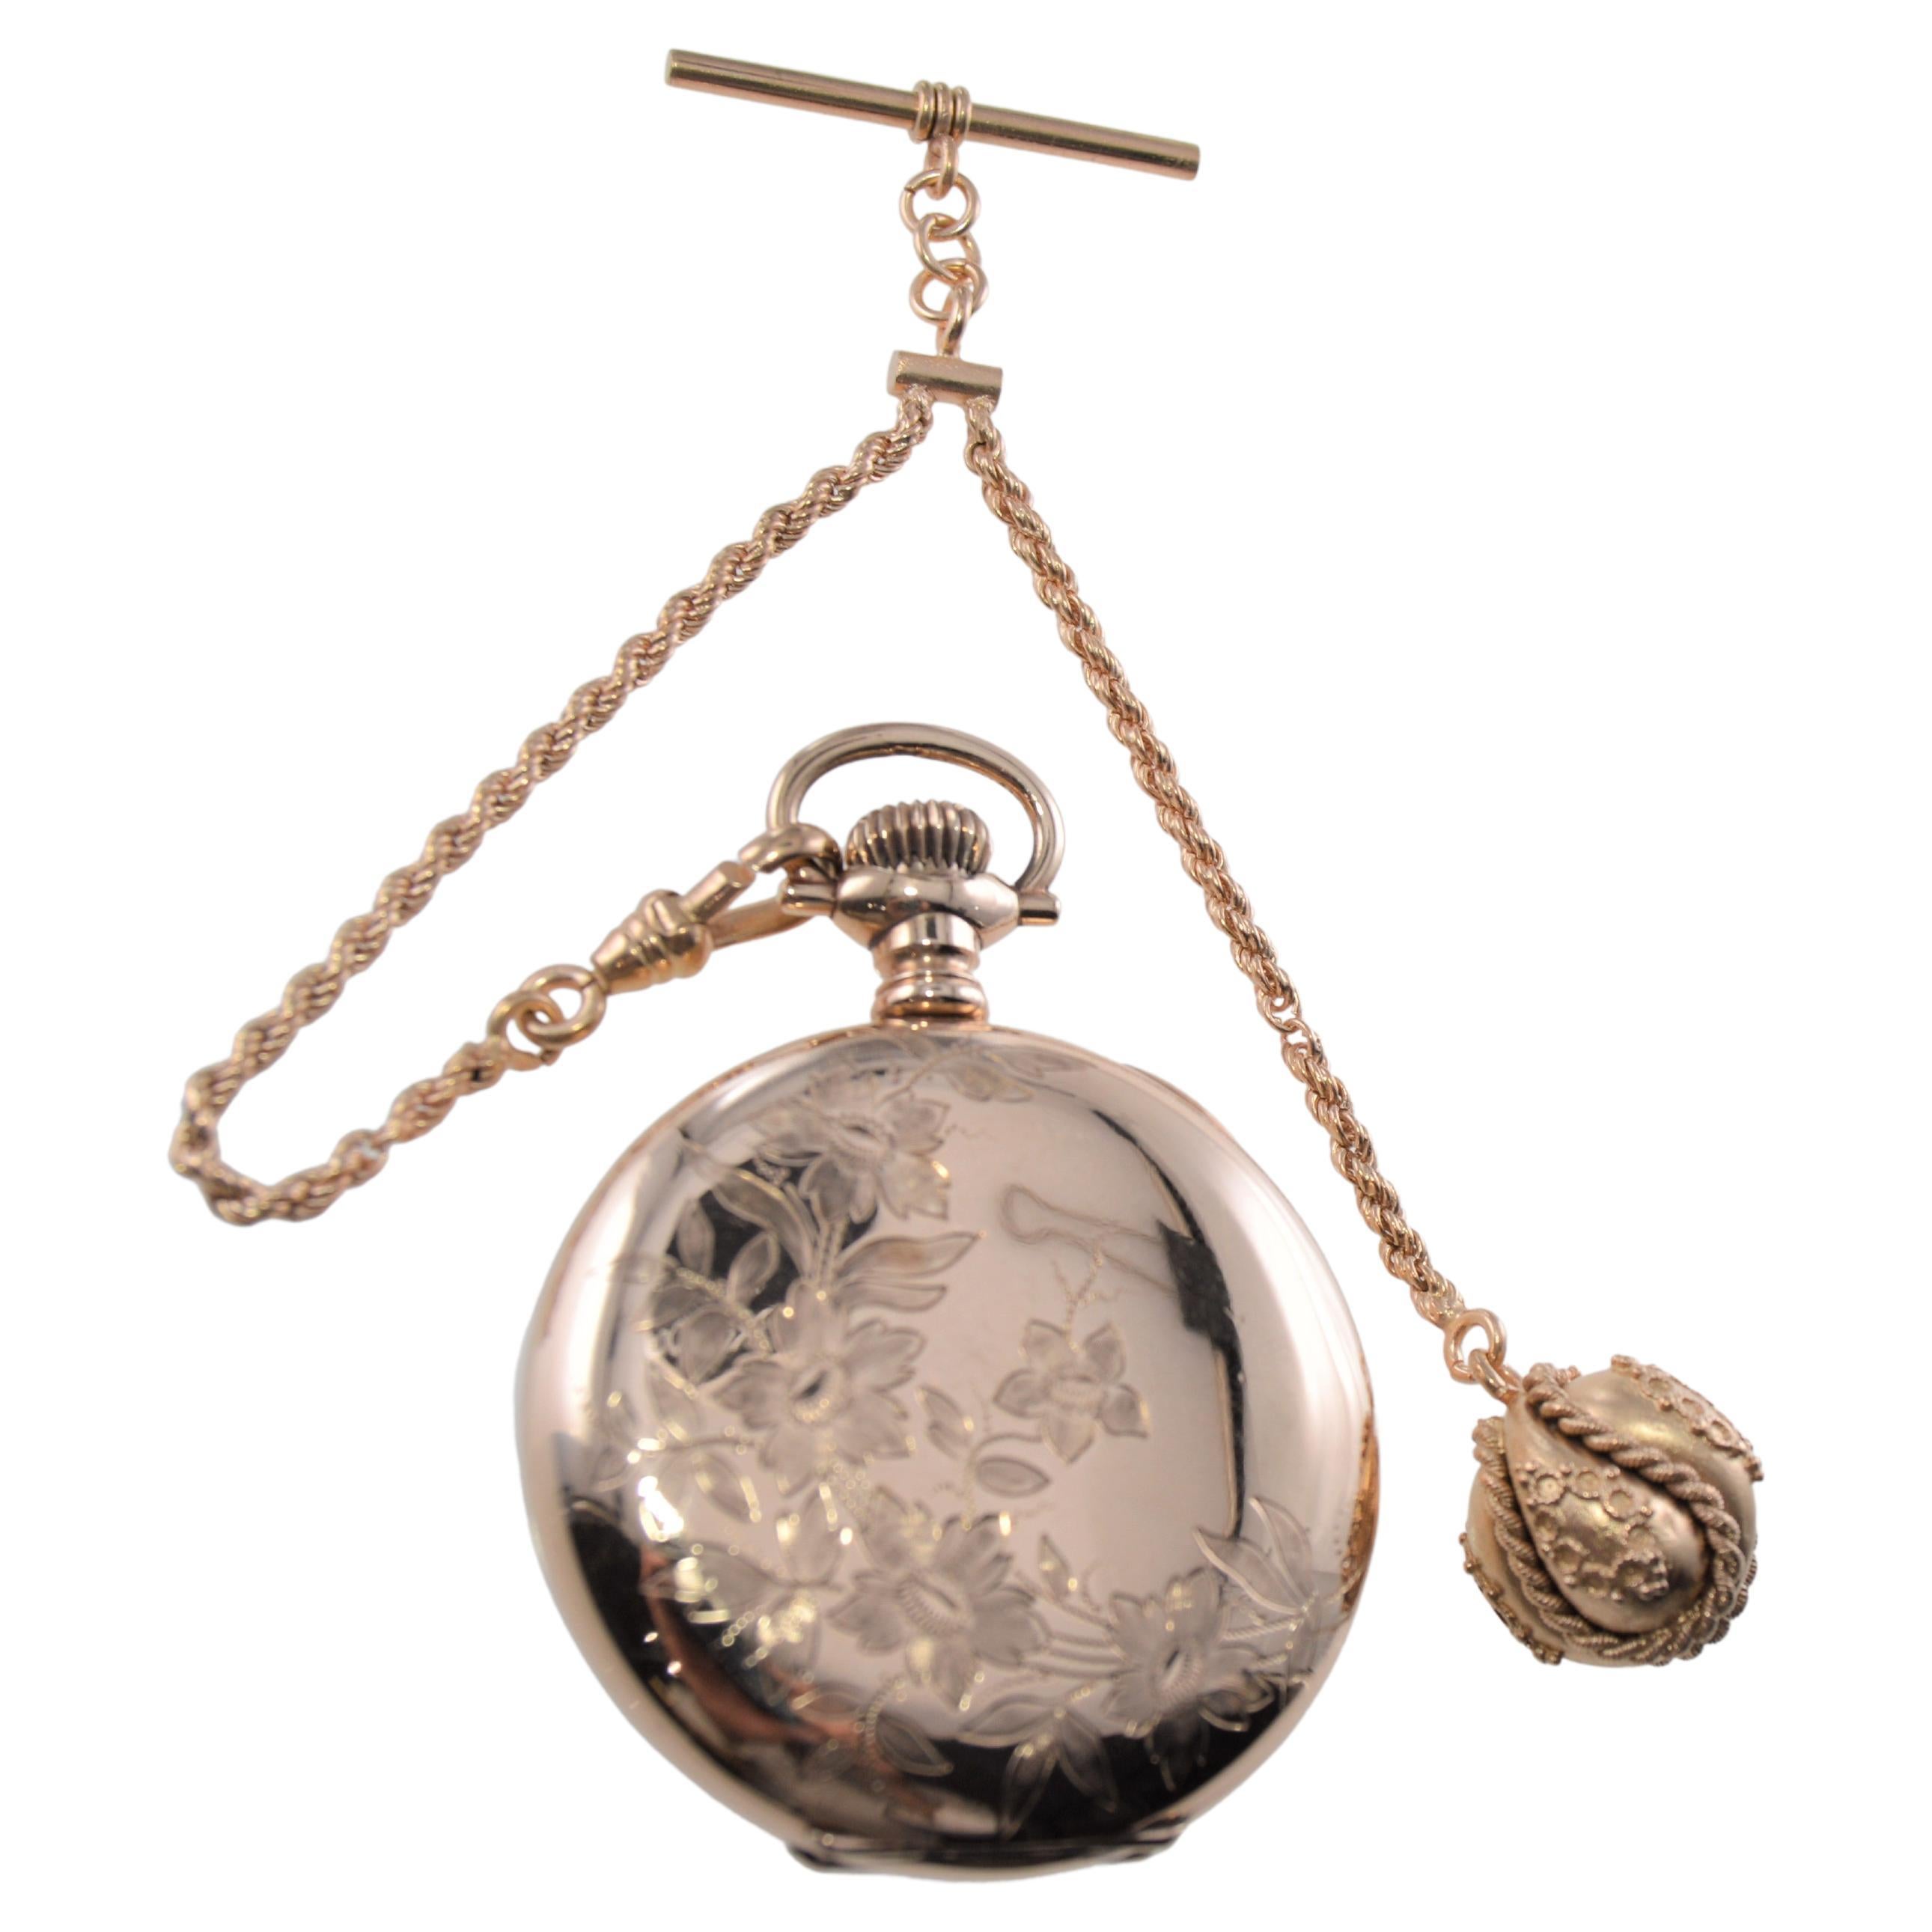 POCKET WATCH CHAINS - AMERICAN CRAFTSMANSHIP - Old Father Time Watchmakers